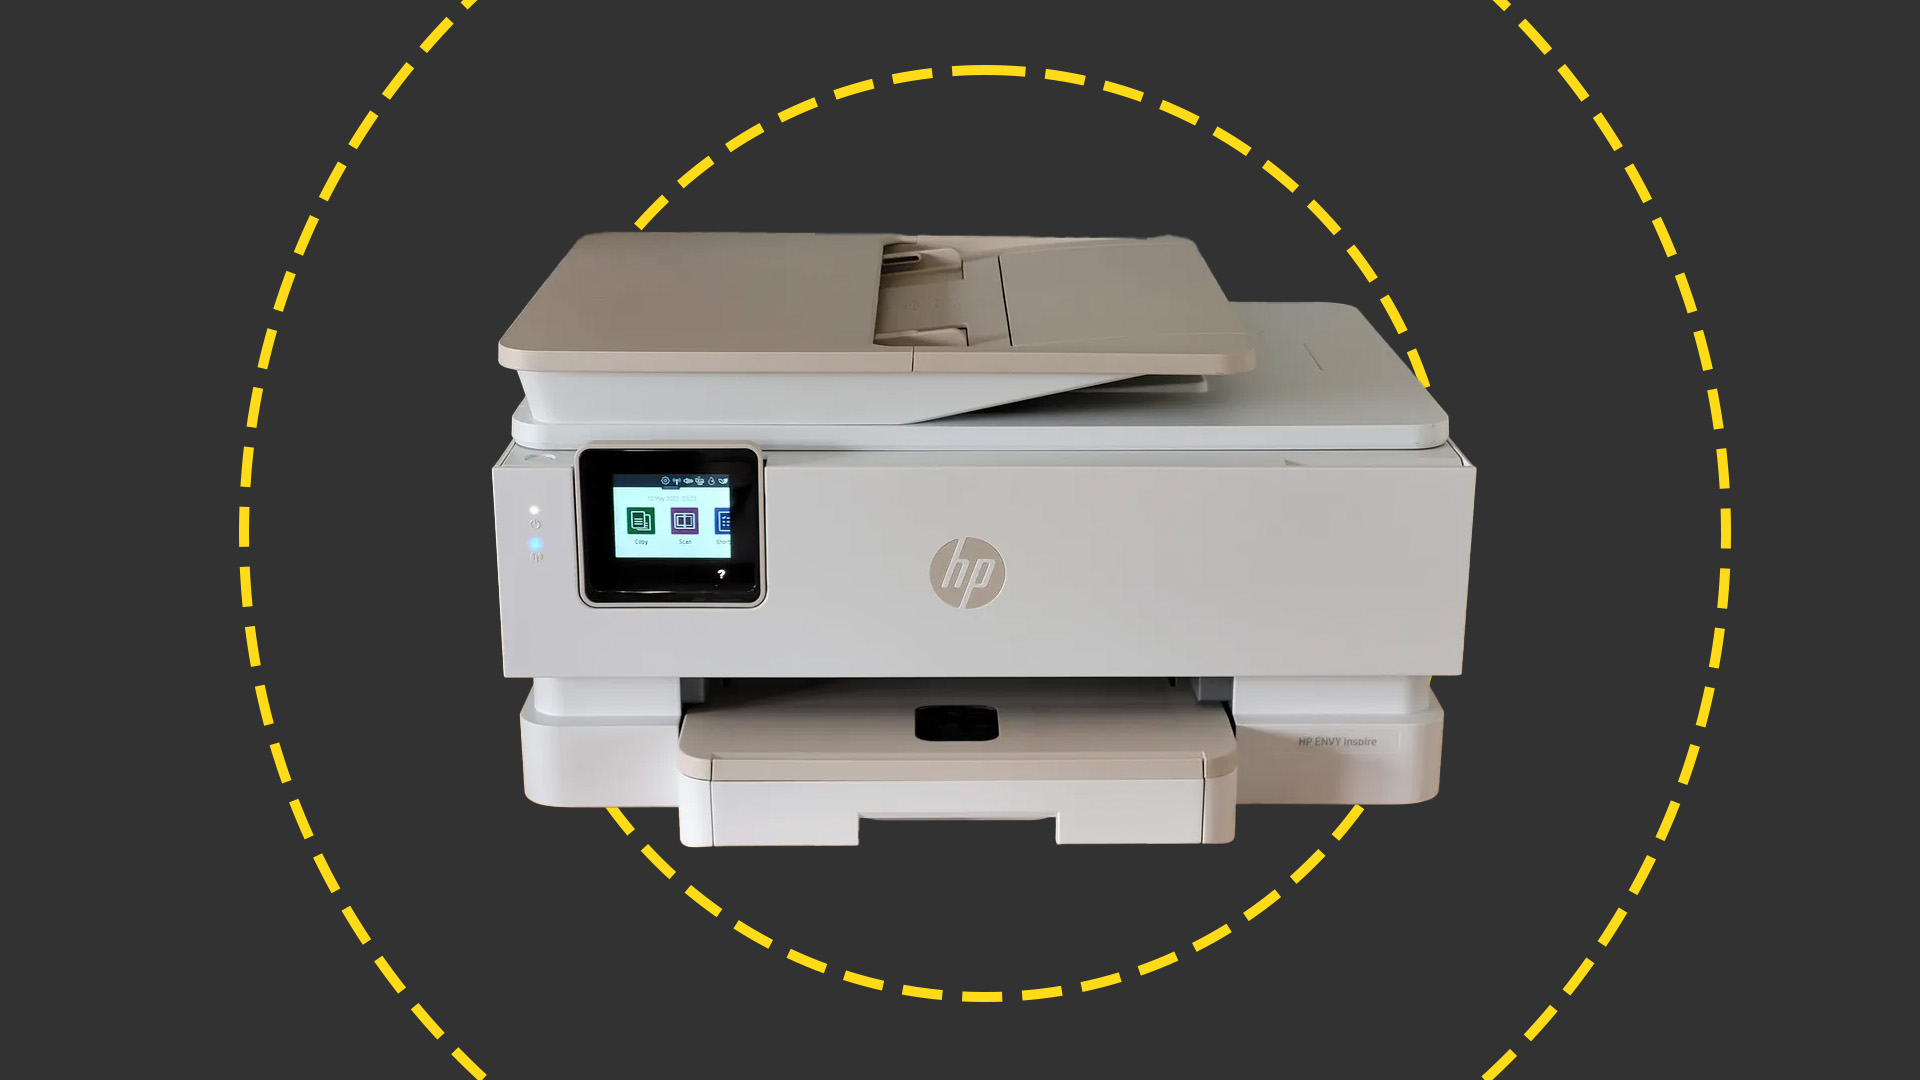 HP ENVY INSPIRE 7220E ALL-IN-ONE HP+ WIRELESS PRINTER / POWERS UP